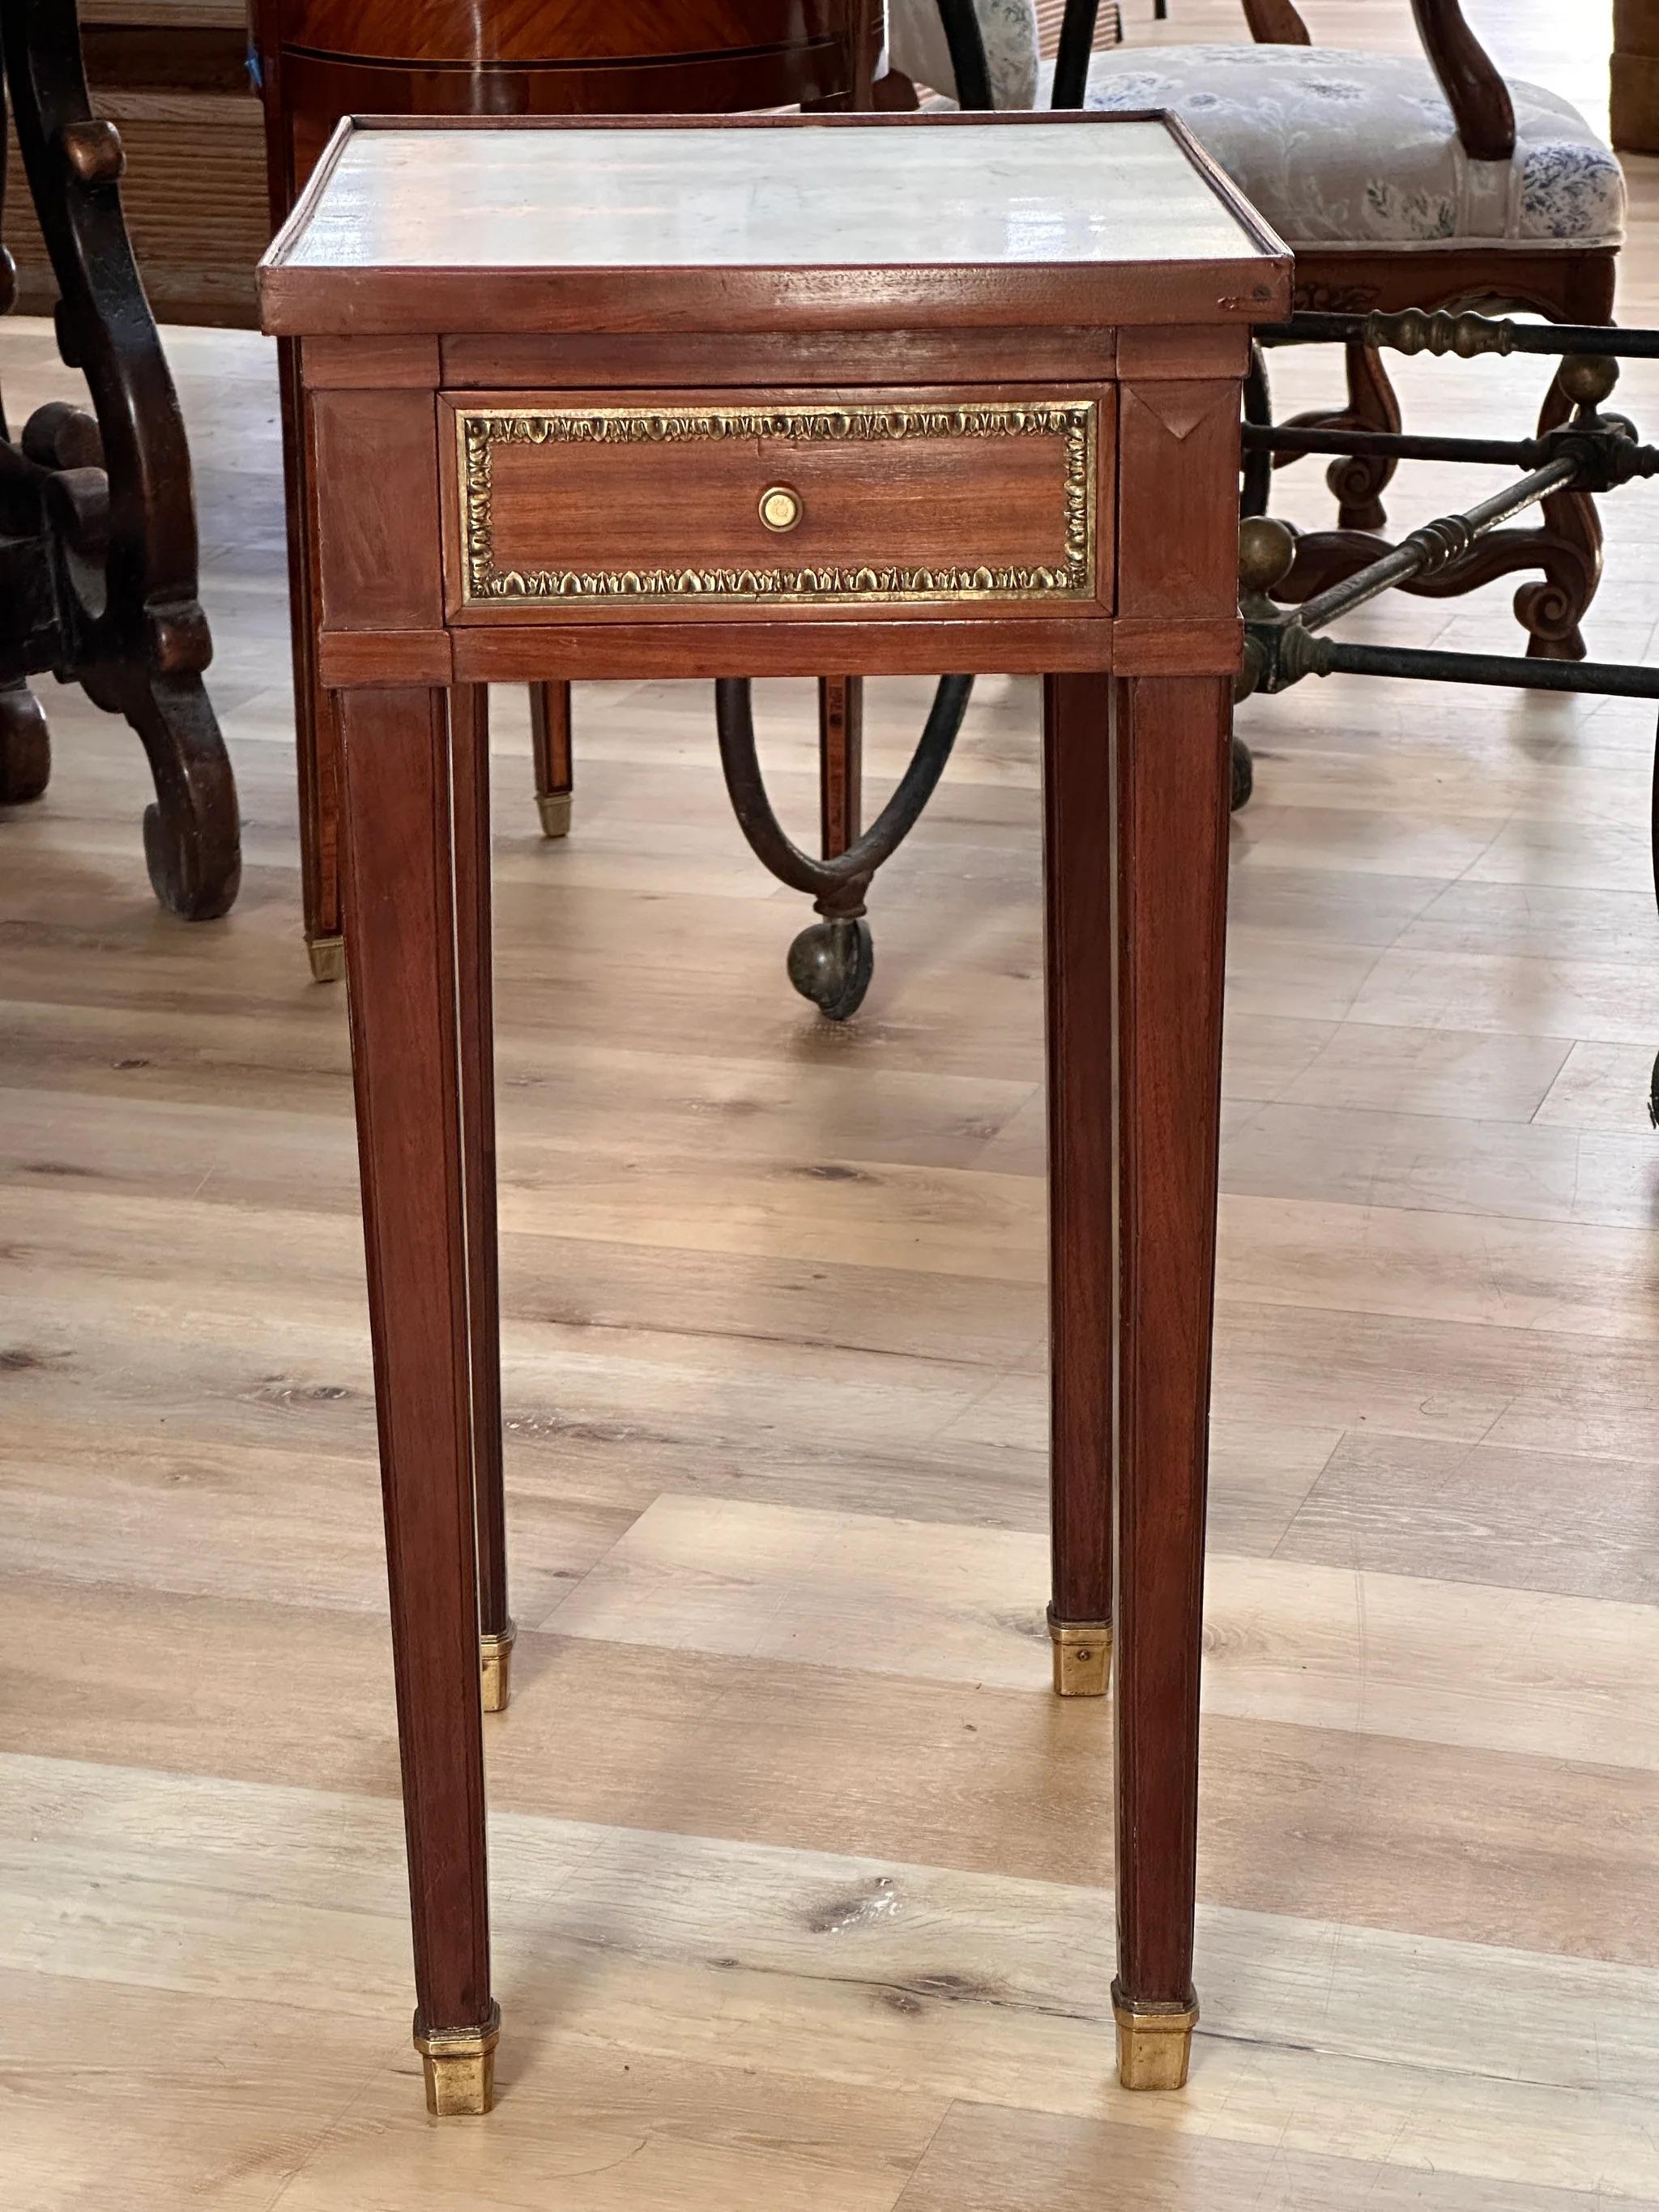 Rare and elegant petite 18th Century Mahogany Side Table, Louis XV period, by famous ebeniste Jean-François Leleu (1729-1807), stamped, the rectangular marble top over a case having a single drawer supported by four square tapered legs, having fine